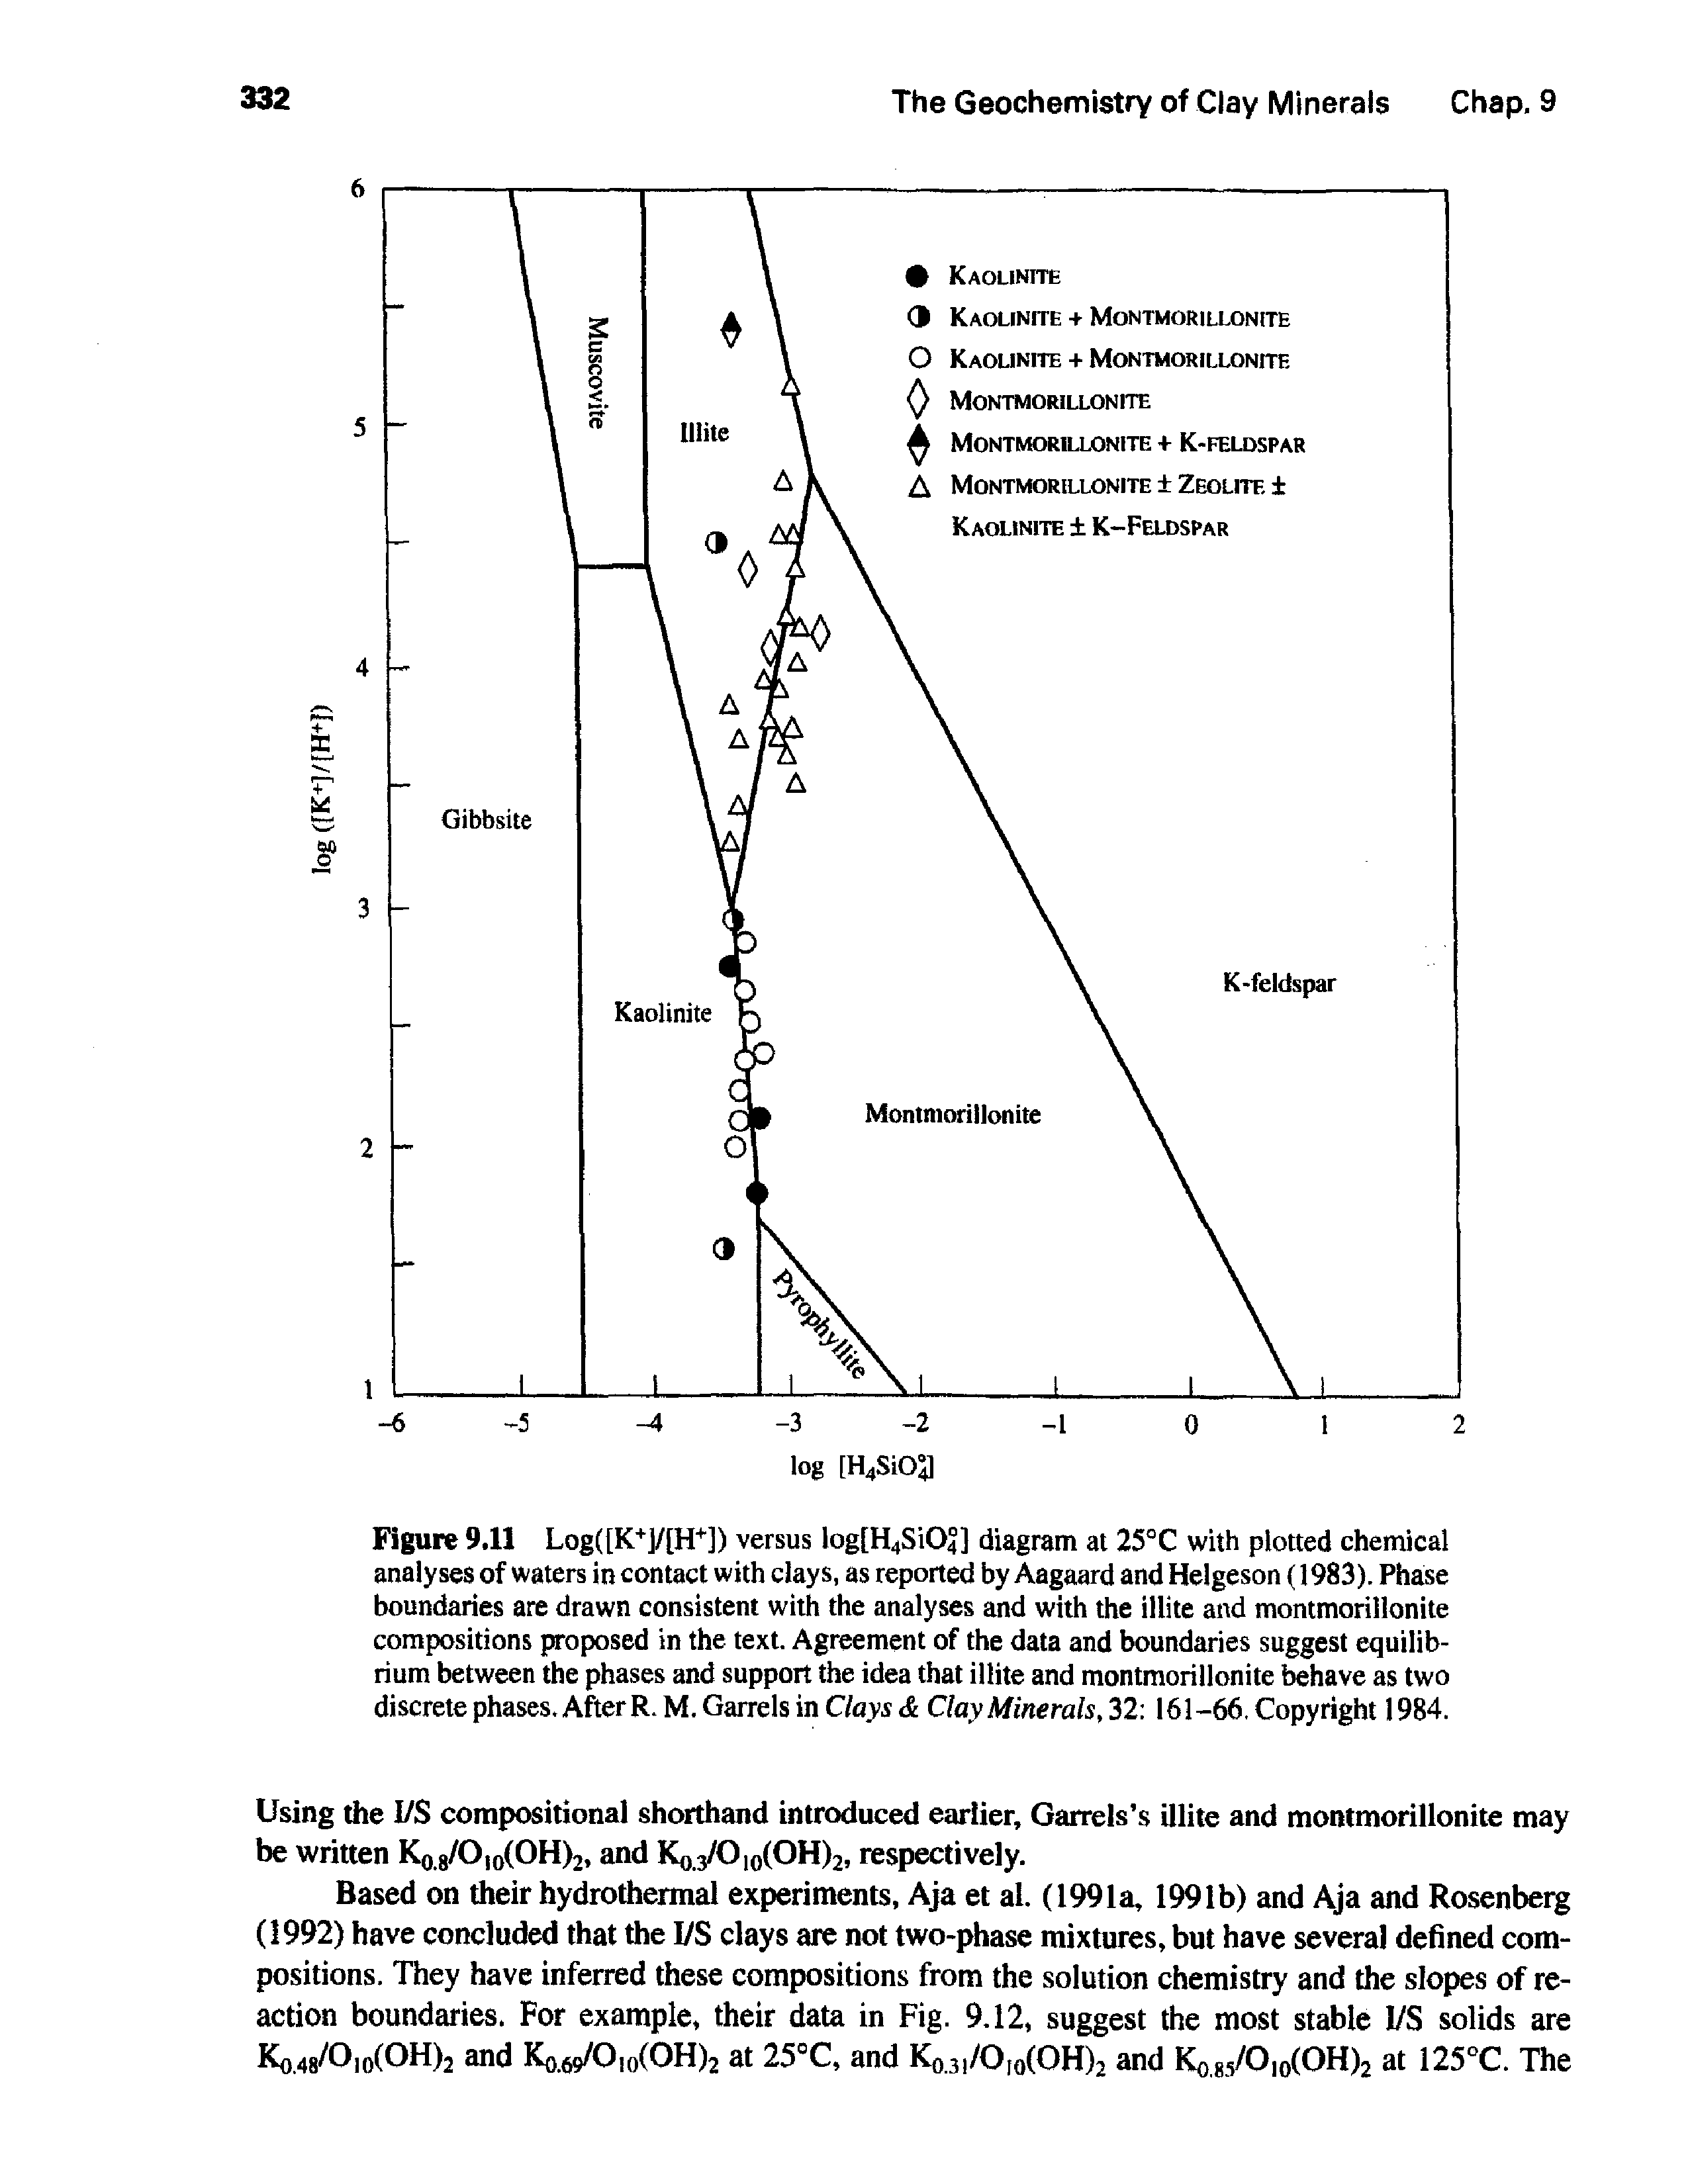 Figure 9.11 Log([K+]/[H" ]) versus log[H4Si04] diagram at 25°C with plotted chemical analyses of waters in contact with clays, as reported by Aagaard and Helgeson (1983). Phase boundaries are drawn consistent with the analyses and with the illite and montmorillonite compositions proposed in the text. Agreement of the data and boundaries suggest equilibrium between the phases and support the idea that illite and montmorillonite behave as two discrete phases.AfterR.M.Garrels in C/oystfe Clay Minerals, 32 161-66, Copyright 1984.